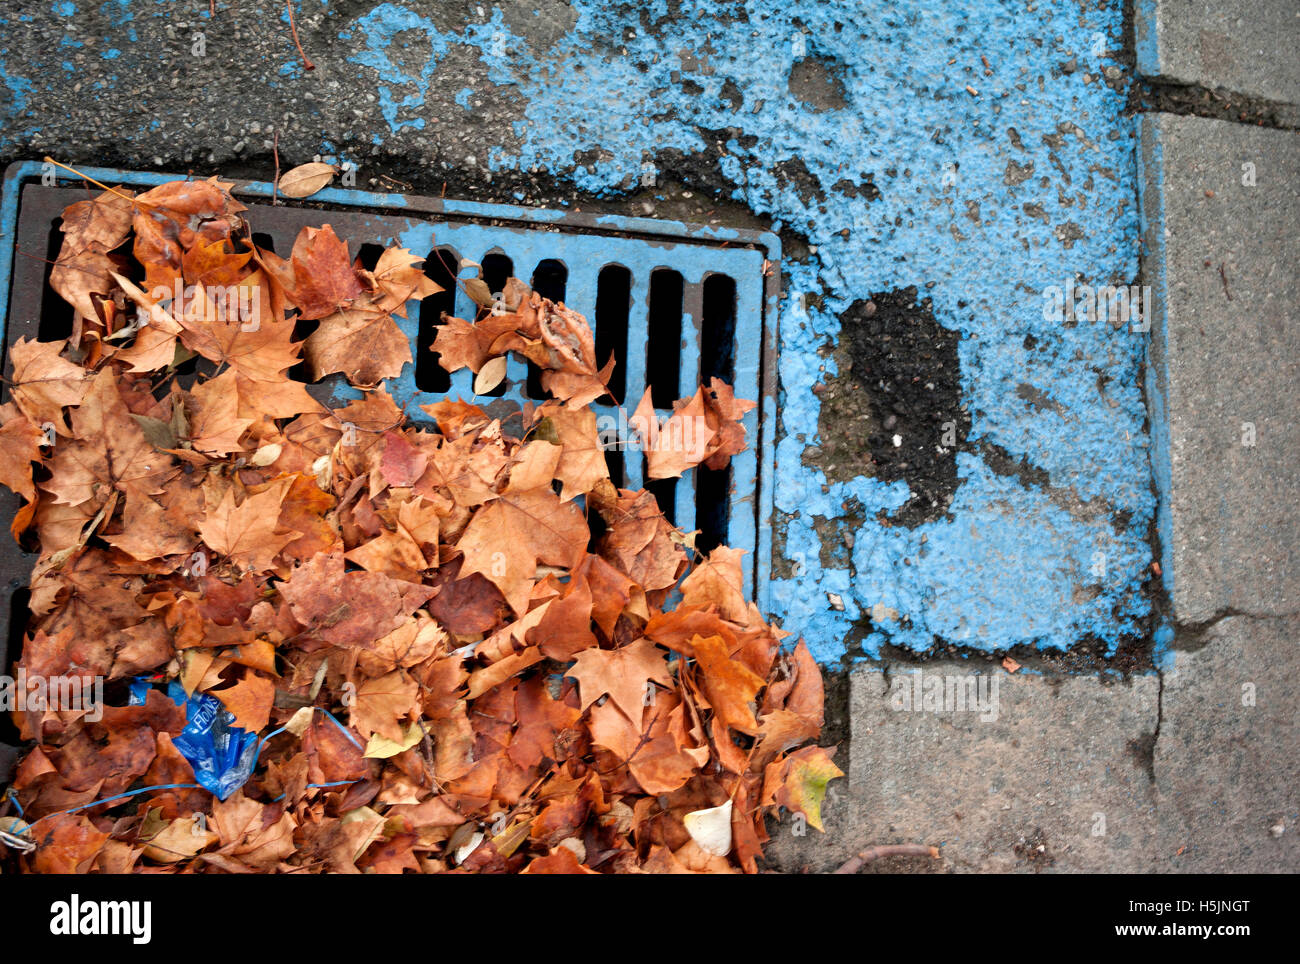 Autumn leaves next to blue paint spilled down drain / Spilled paint and leaves Stock Photo